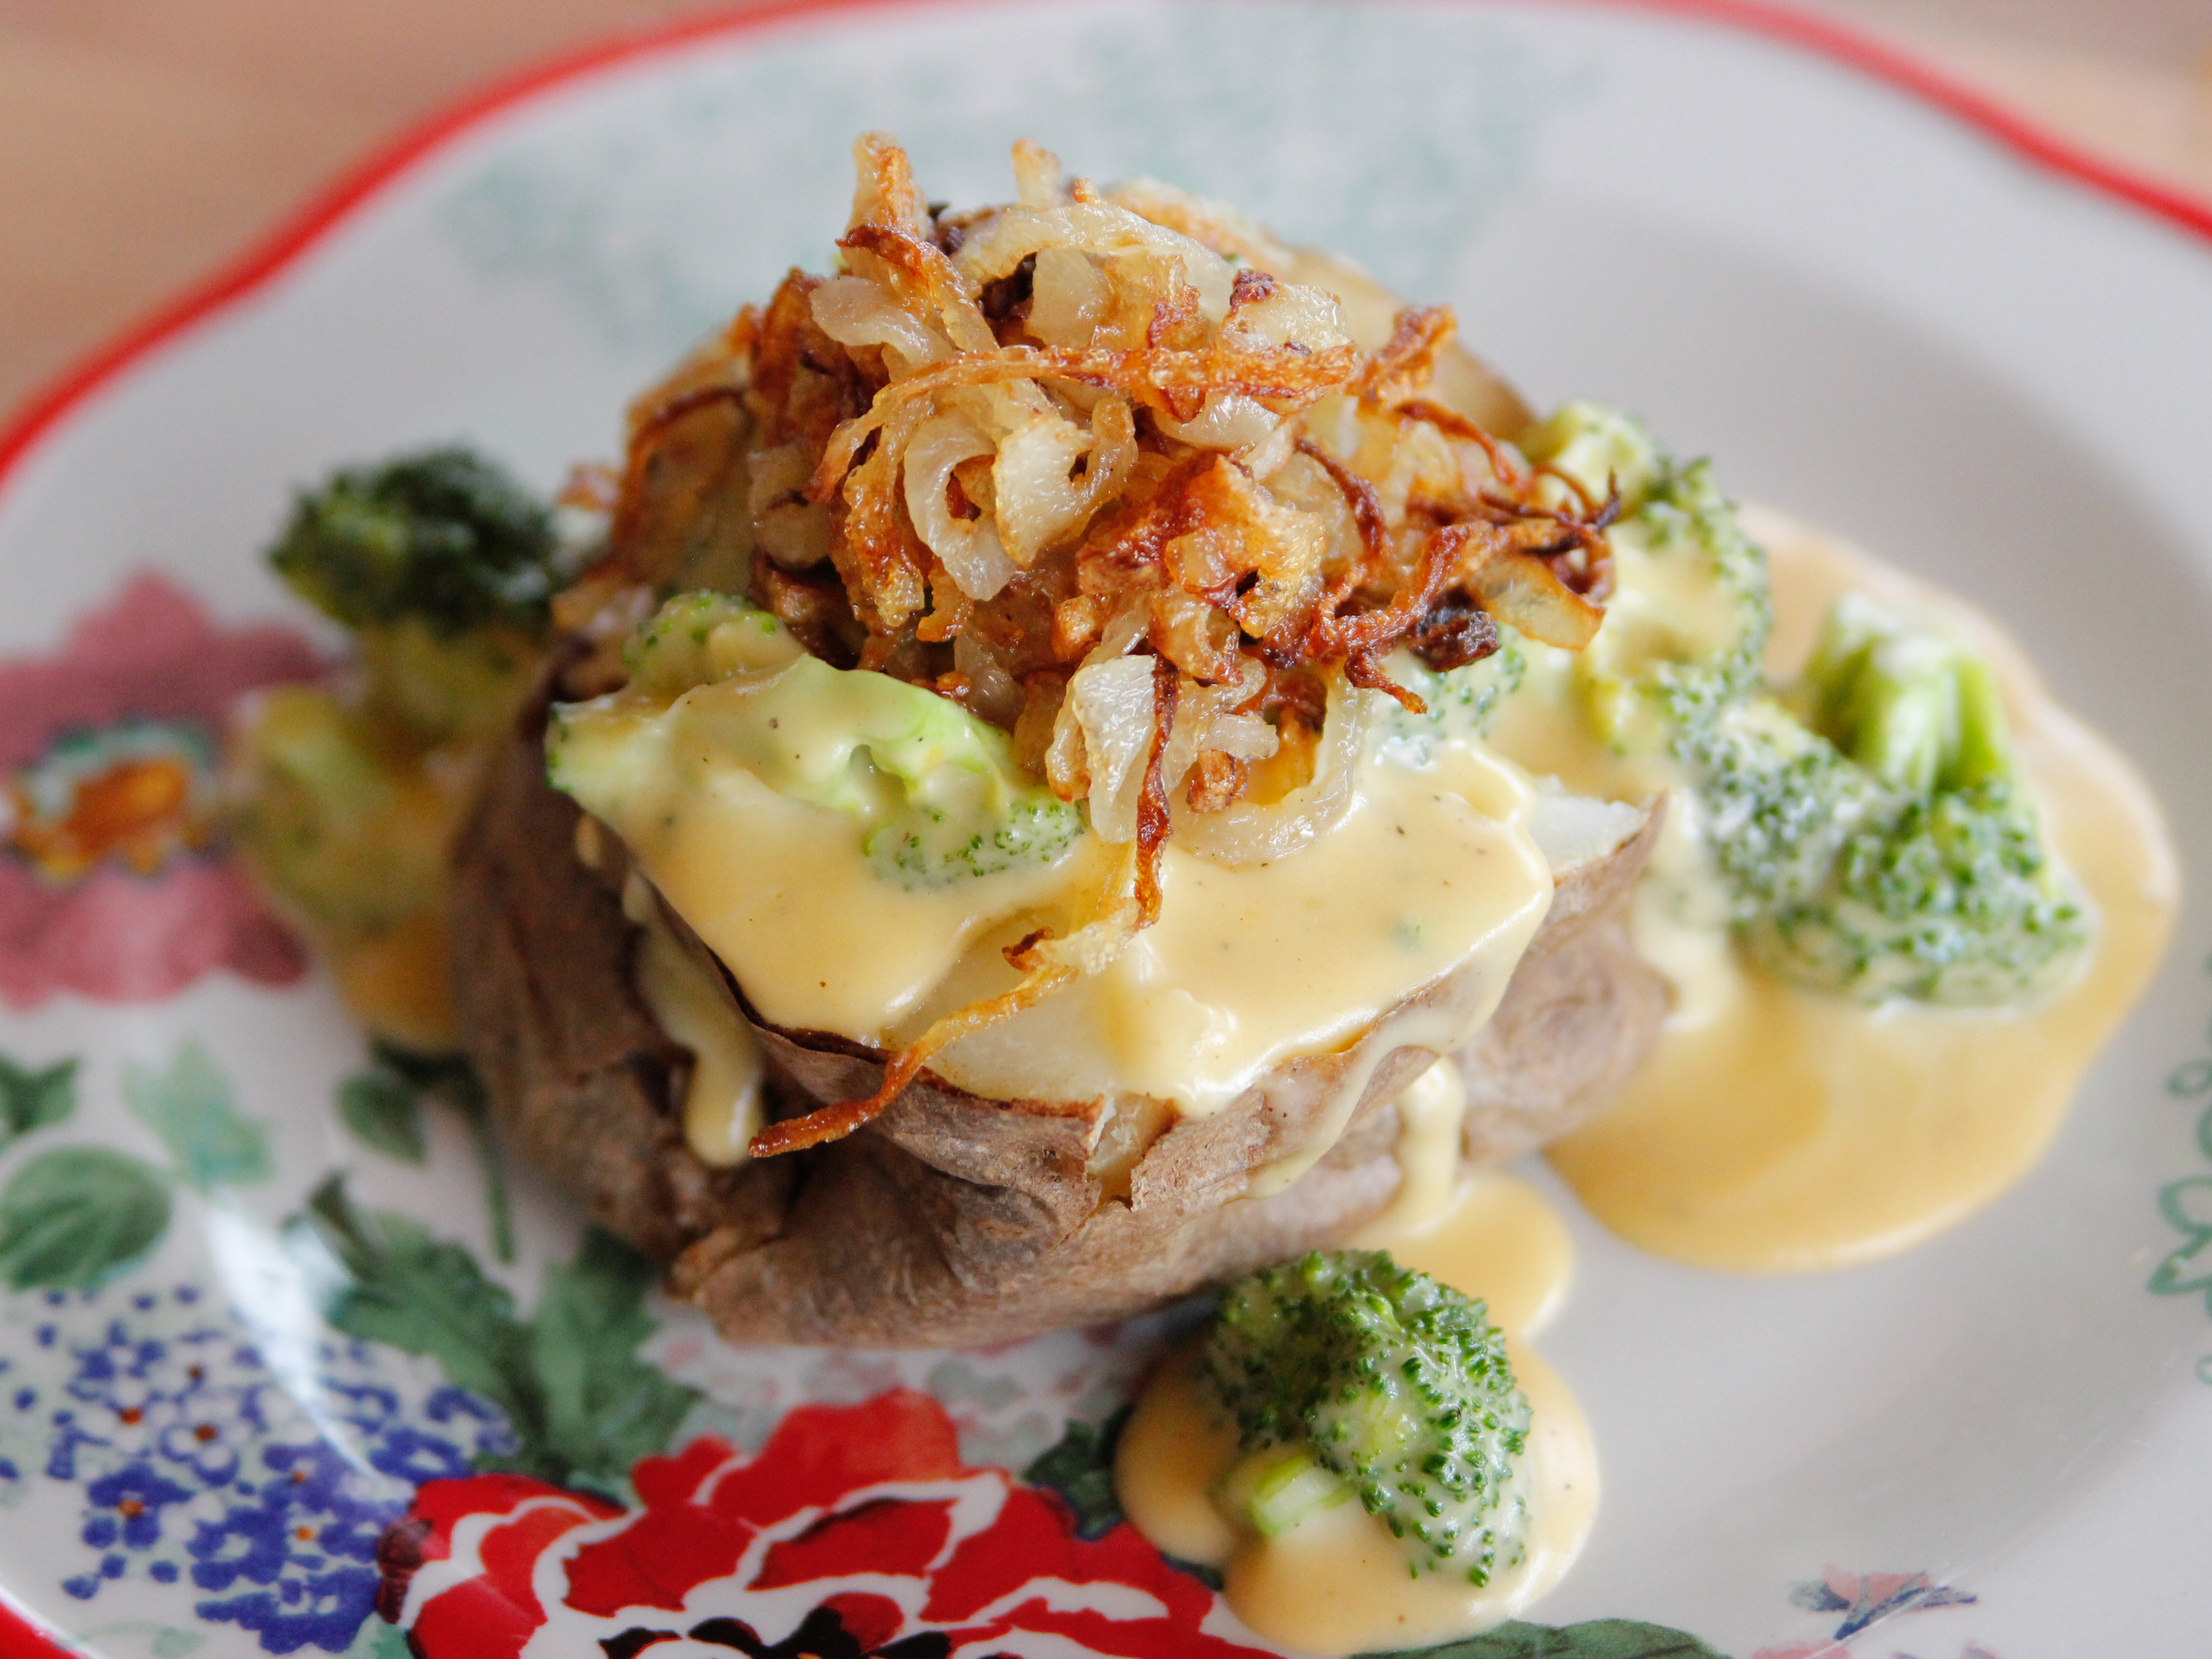 https://www.foodnetwork.com/content/dam/images/food/fullset/2015/11/22/0/WU1205H_Broccoli-Cheese-Baked-Potatoes_s4x3.jpg